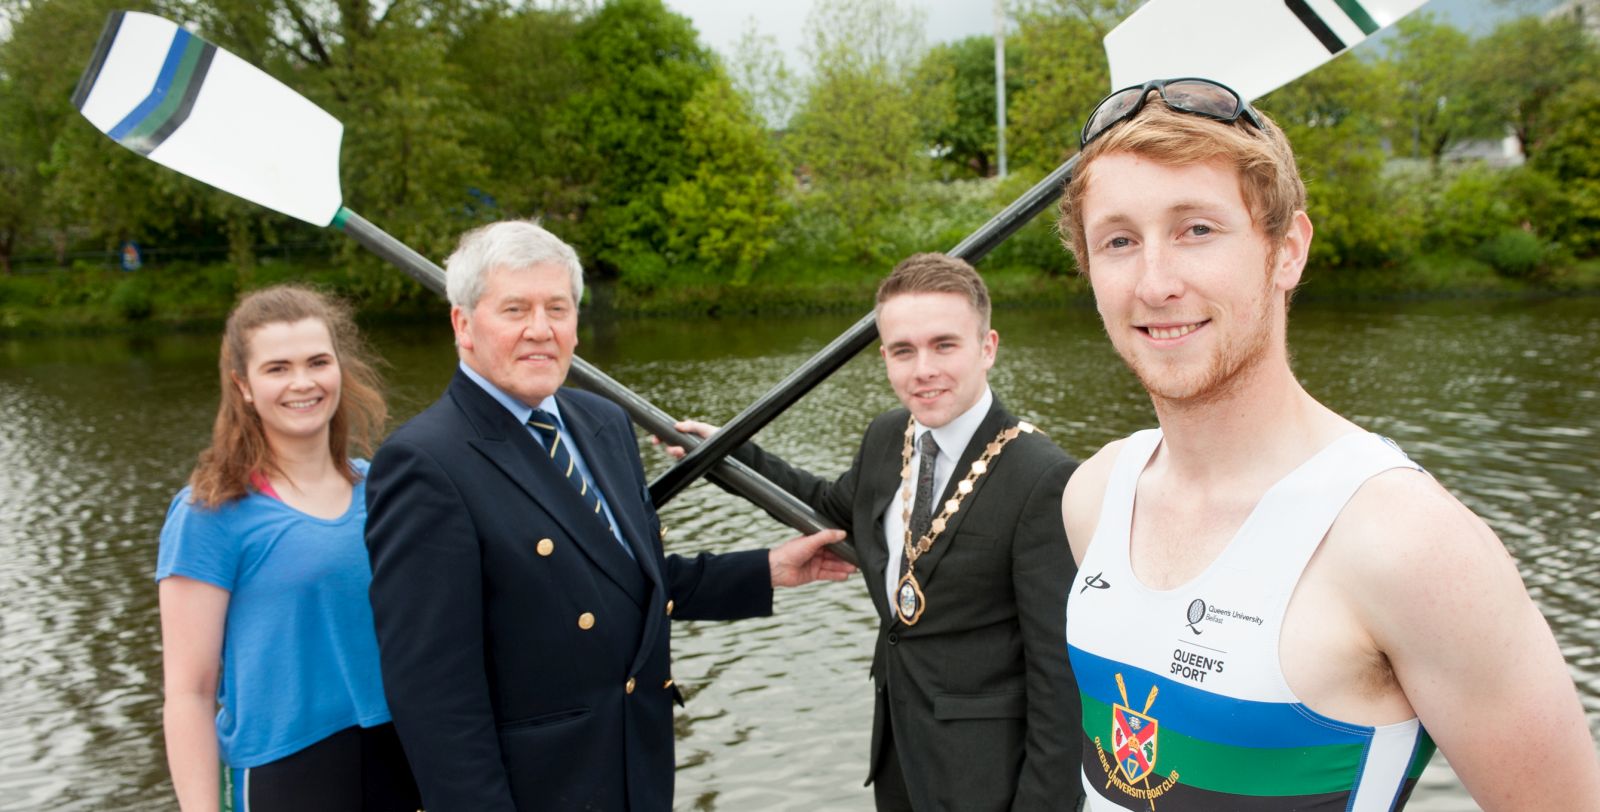 Launching 2016 University Boat Race at Queen’s new £1.2M Boathouse on the River Lagan are Deputy Lord Mayor of Belfast Alderman Guy Spence, Ellie Holmes, Captain, Queen’s Senior Ladies and Jason Armstrong, Captain, Queen’s Senior Men’s crew, along with Des Hill, Past President of Trinity Rowing Club.